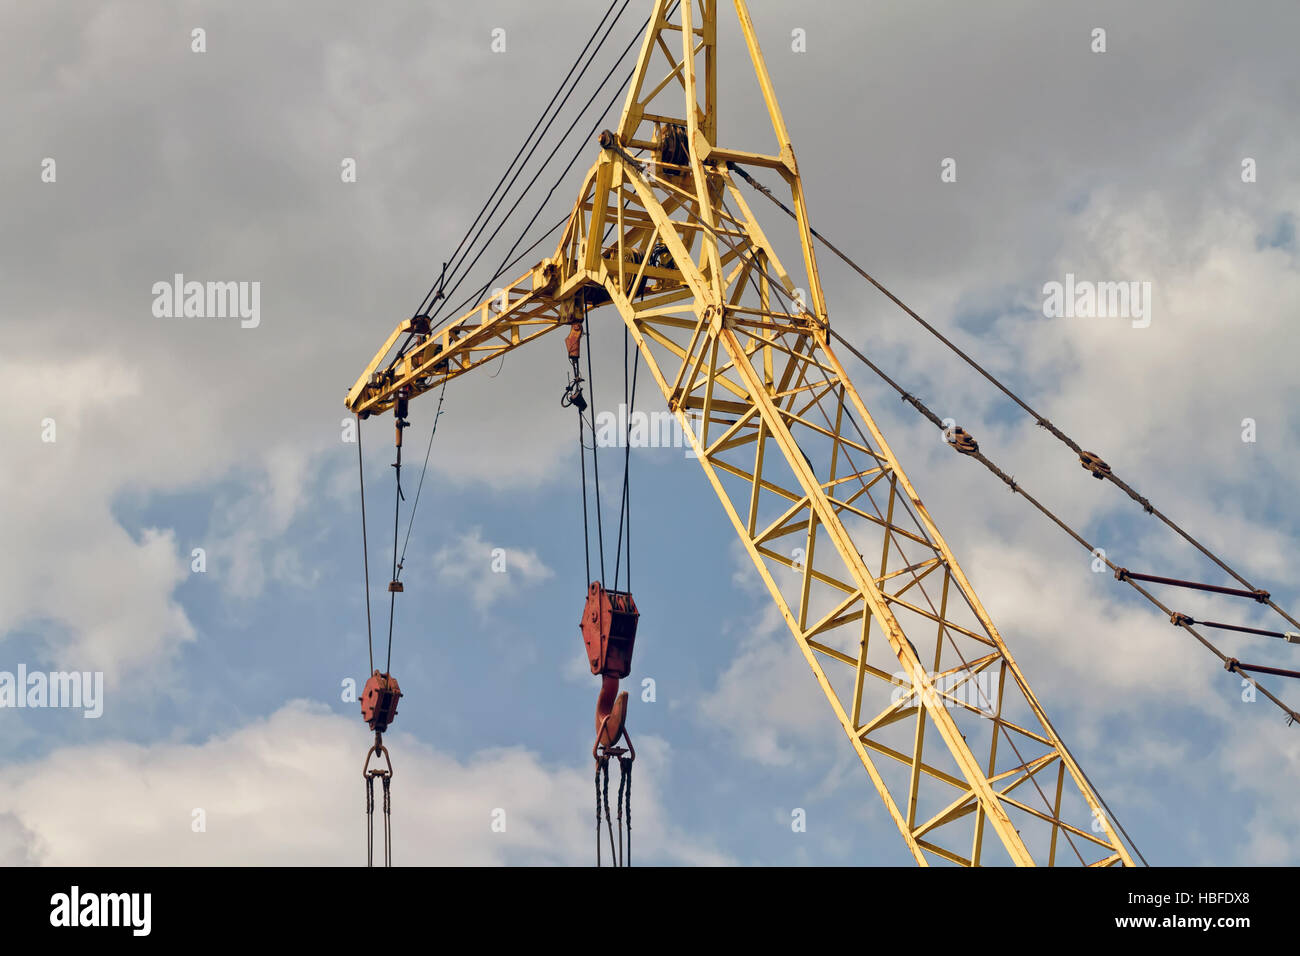 Boom crawler crane with hooks and ropes Stock Photo